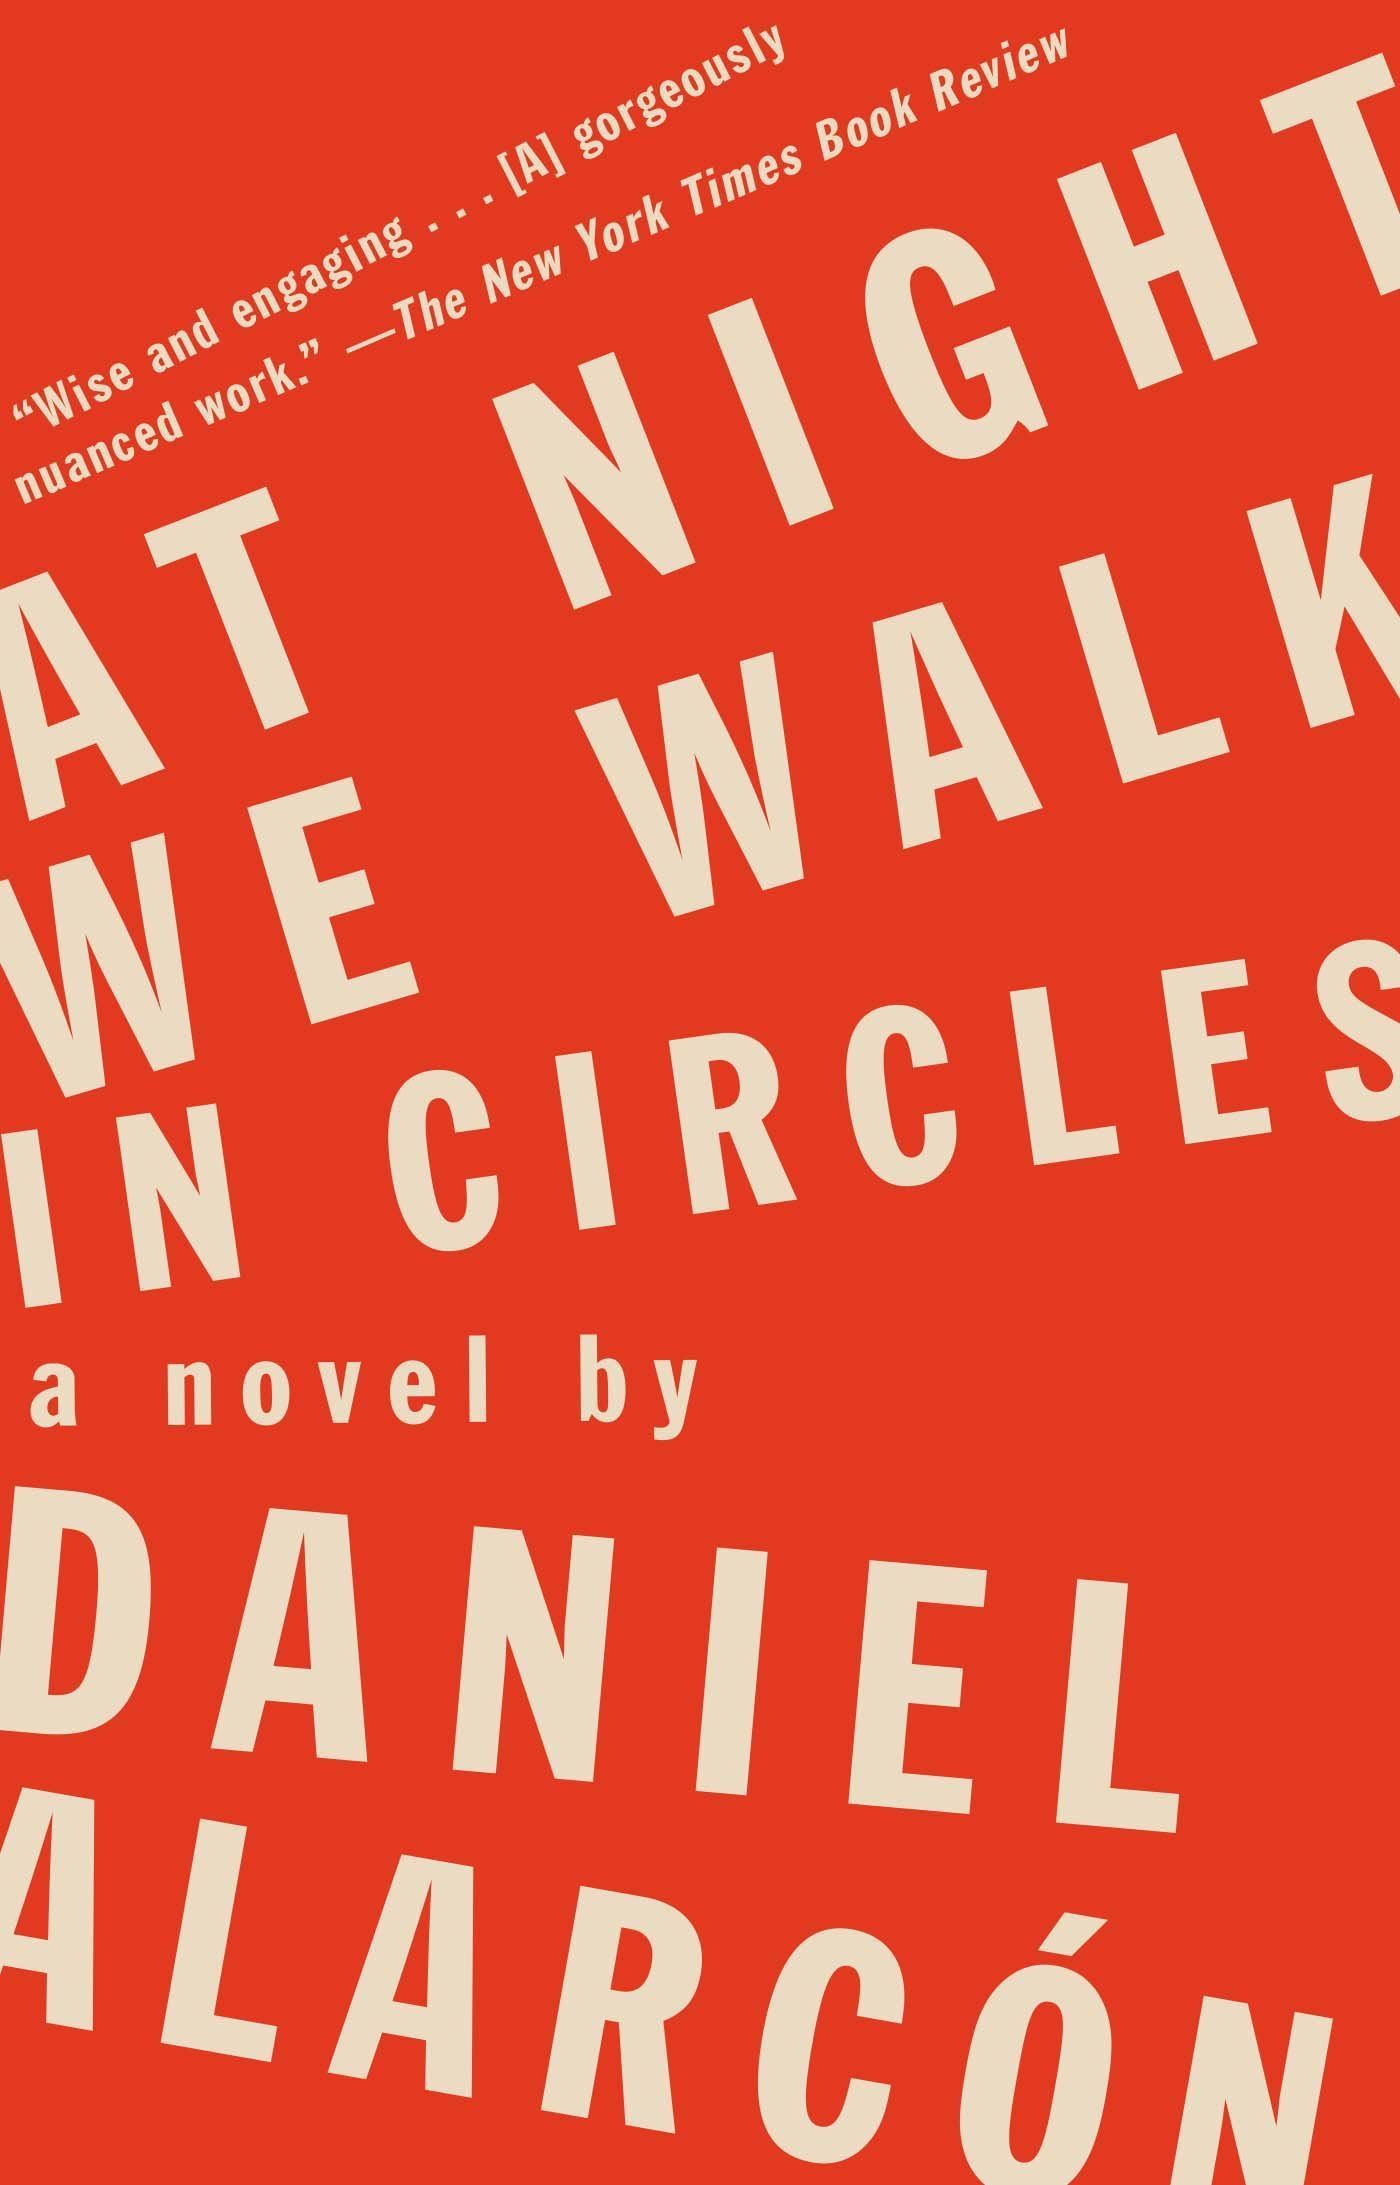 Second Acts: Daniel Alarcón's "At Night We Walk in Circles"